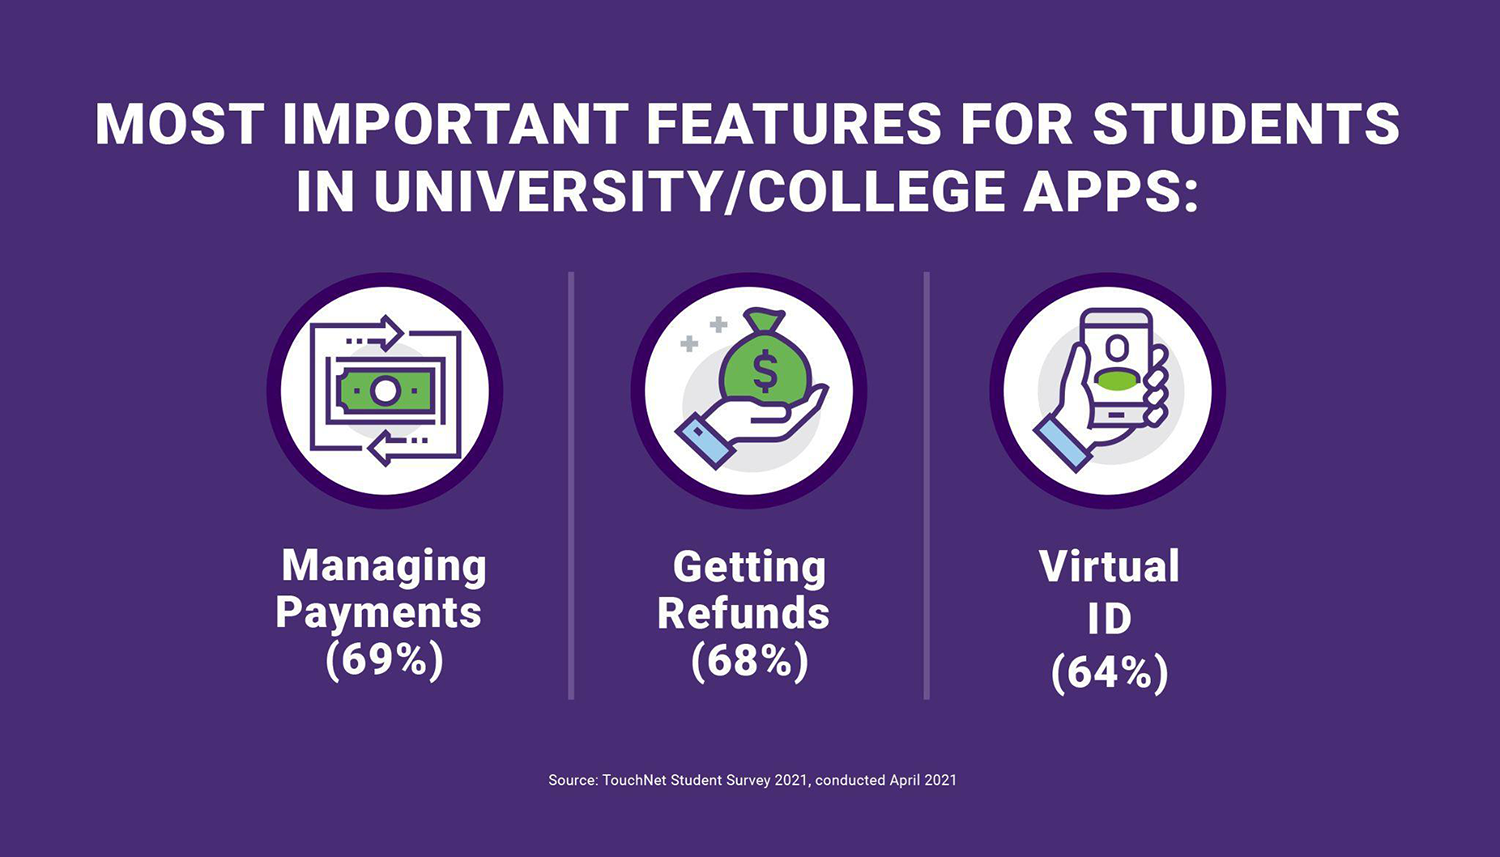 Most Important Features for Students in University/College Apps. Managing Payments 69%; Getting Refunds 68%; Virtual ID 64%. Source: TouchNet Student Survey 2021, conducted April 2021.